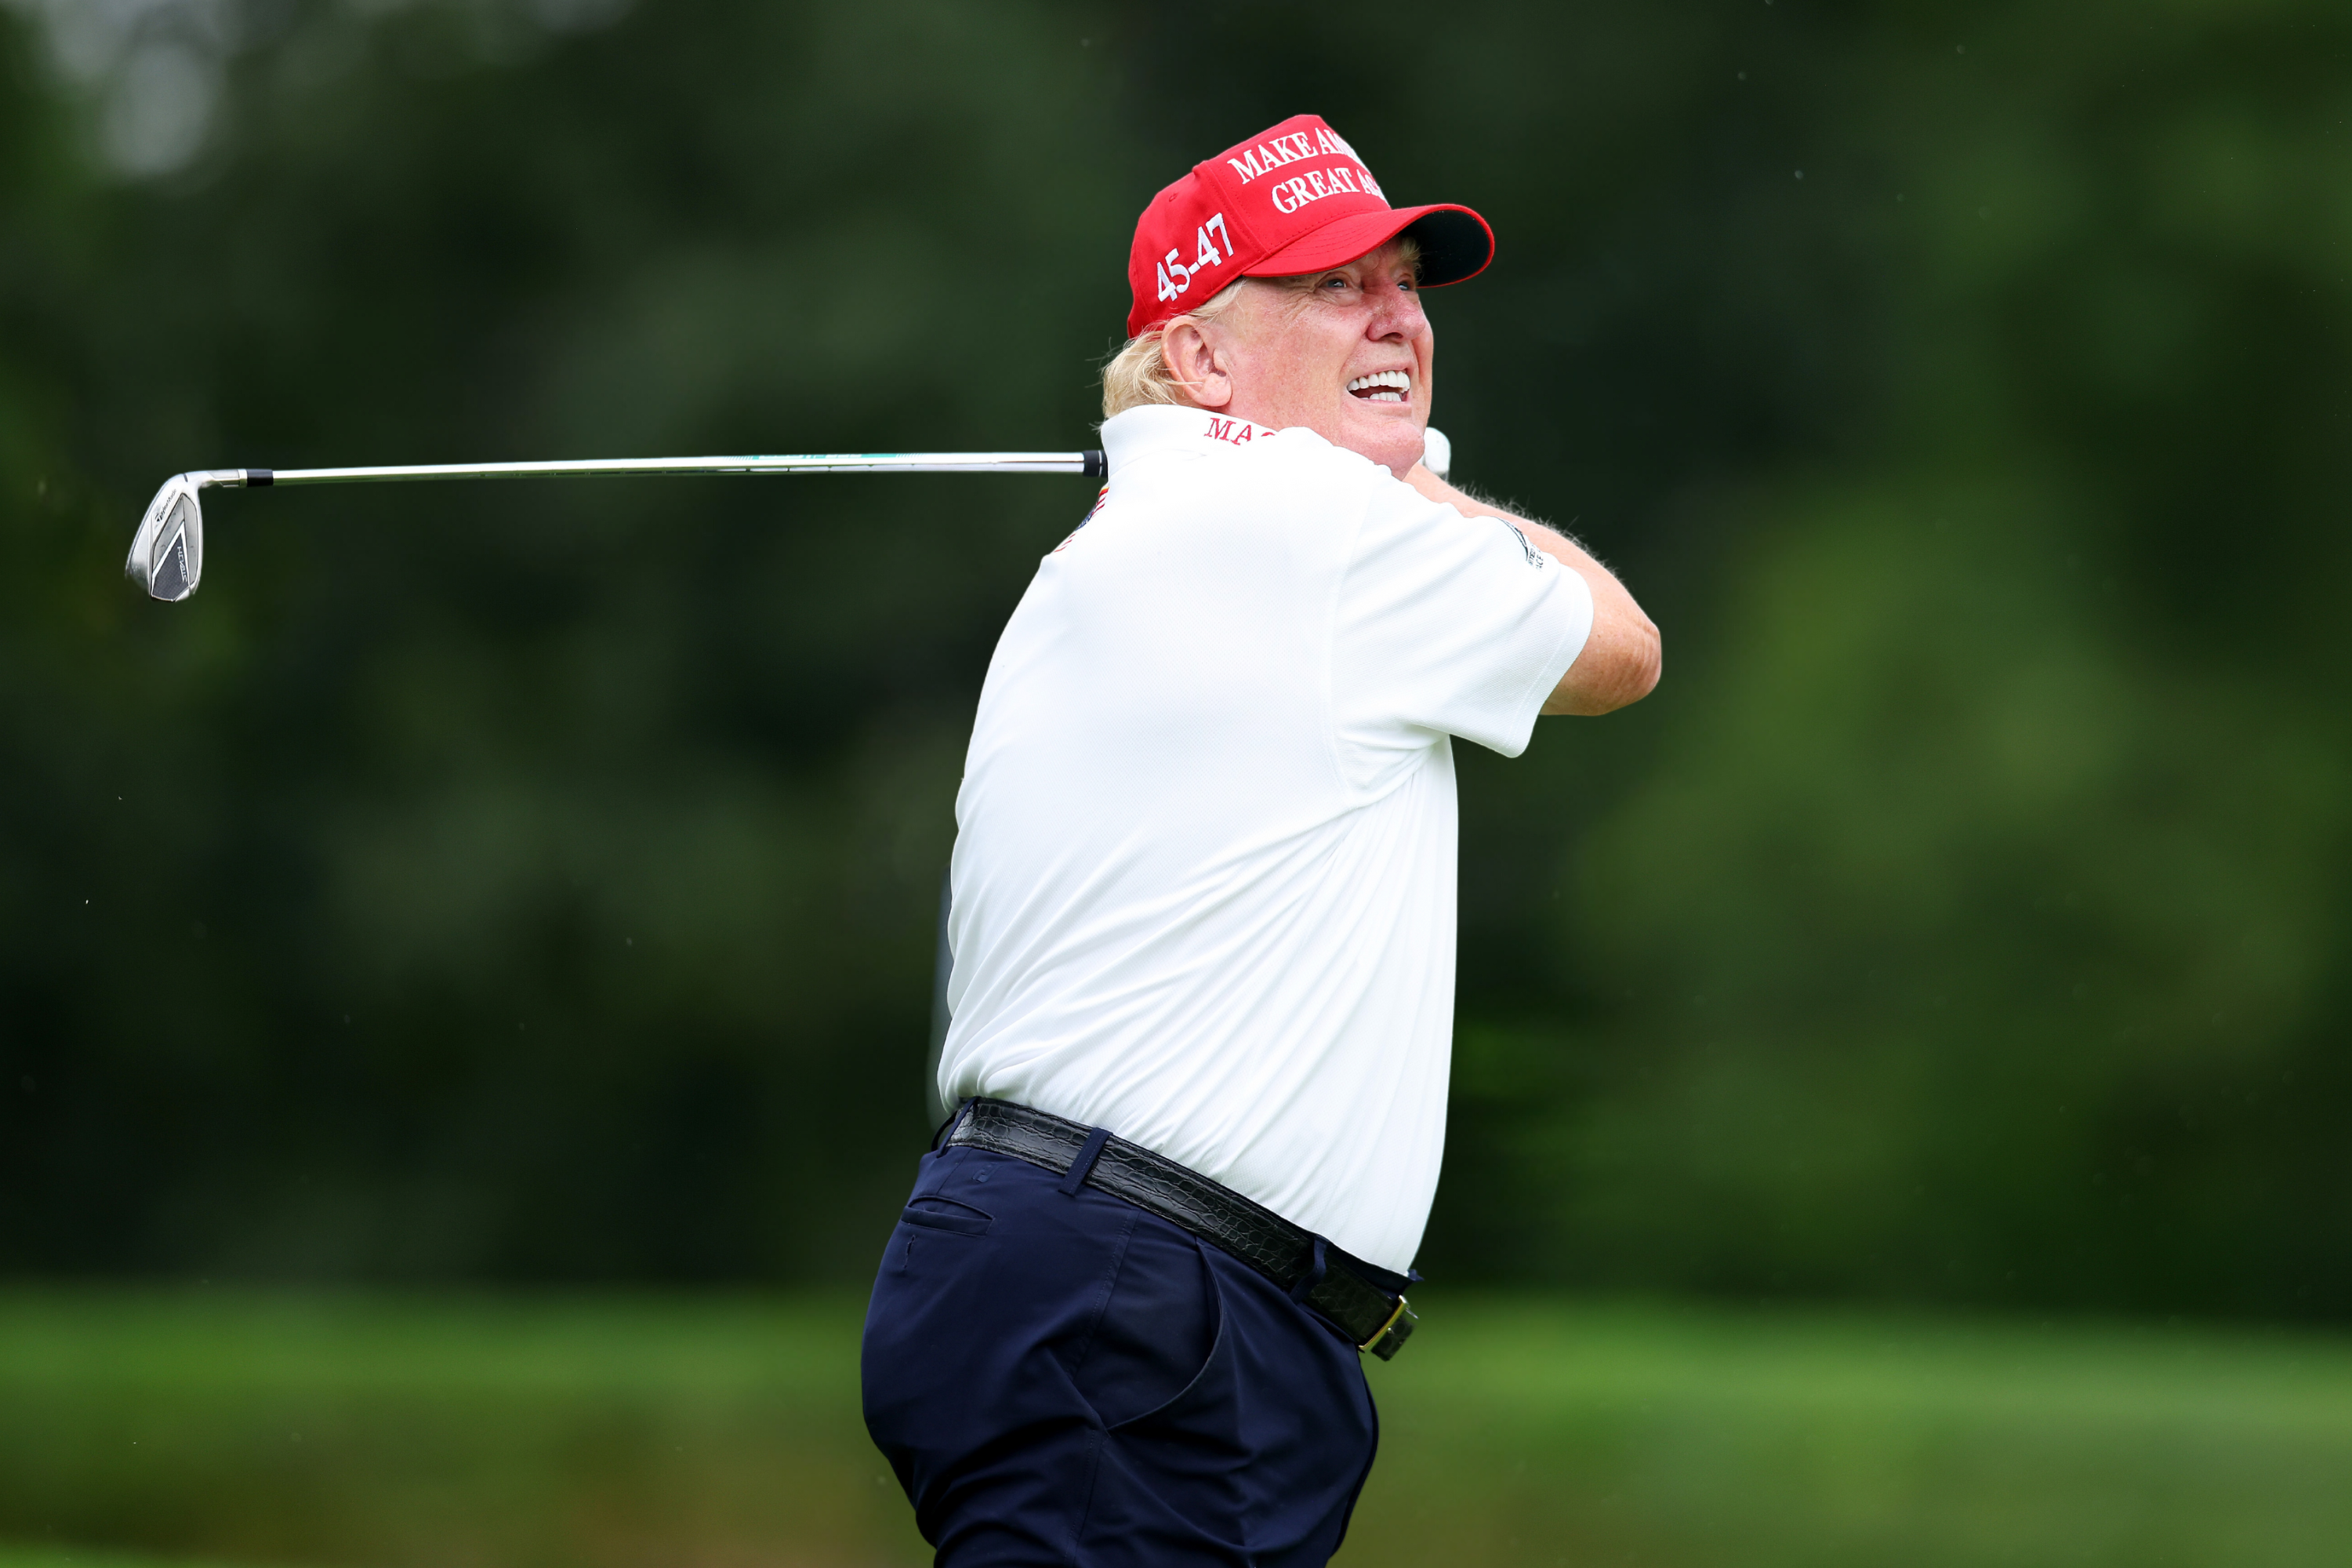 Donald Trump’s Golf Handicap Compared to Other Celebrities